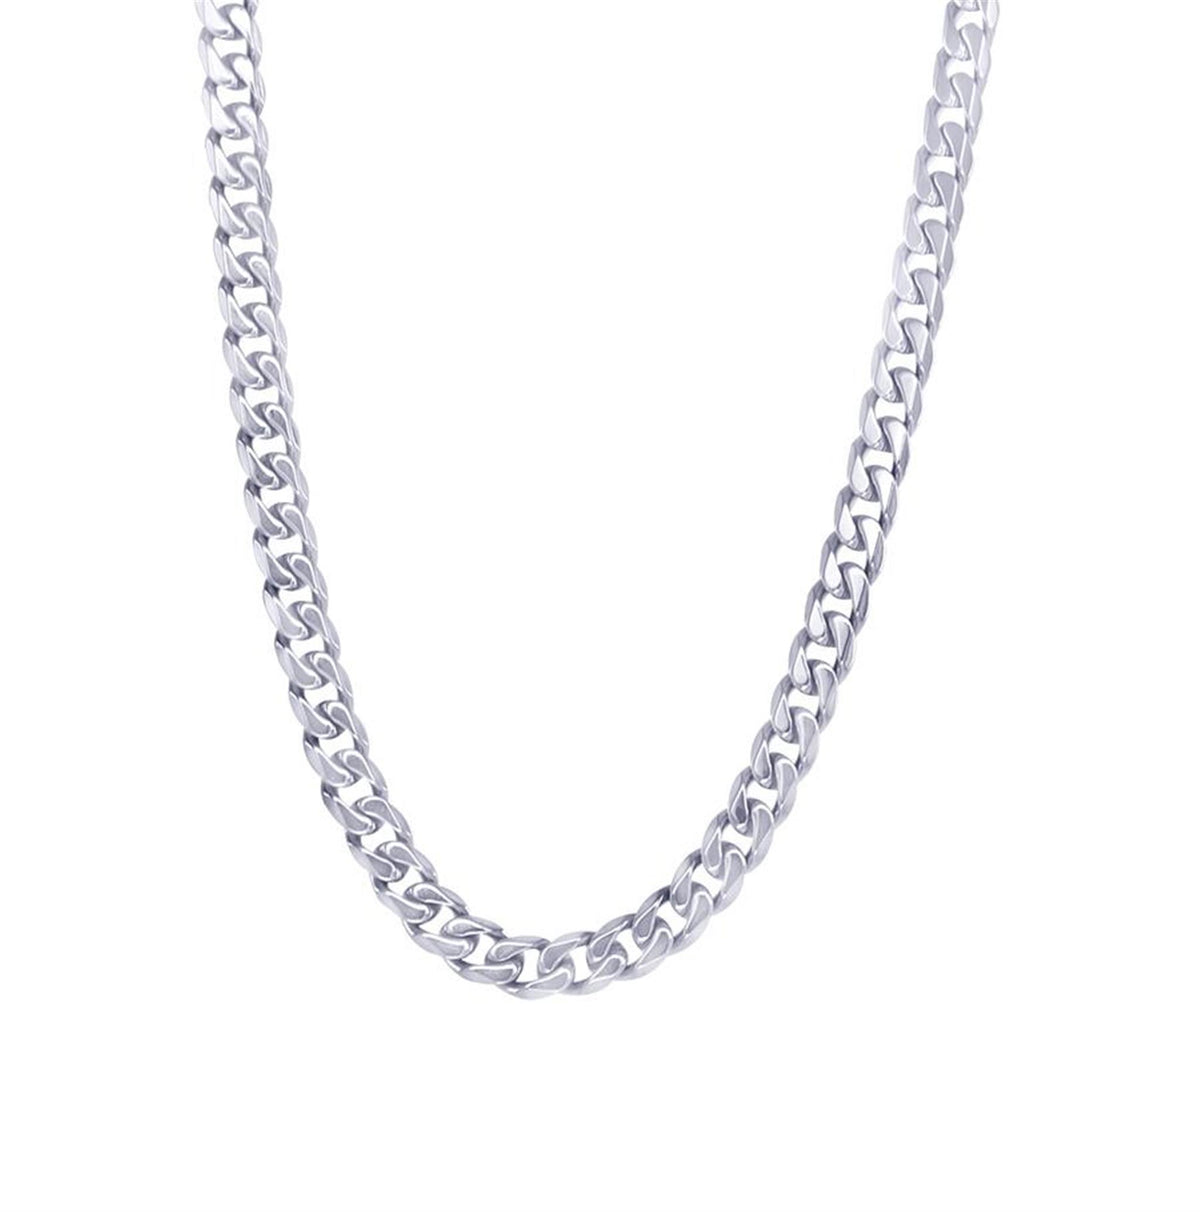 Stainless Steel 4.6mm Curb Chain - 22"